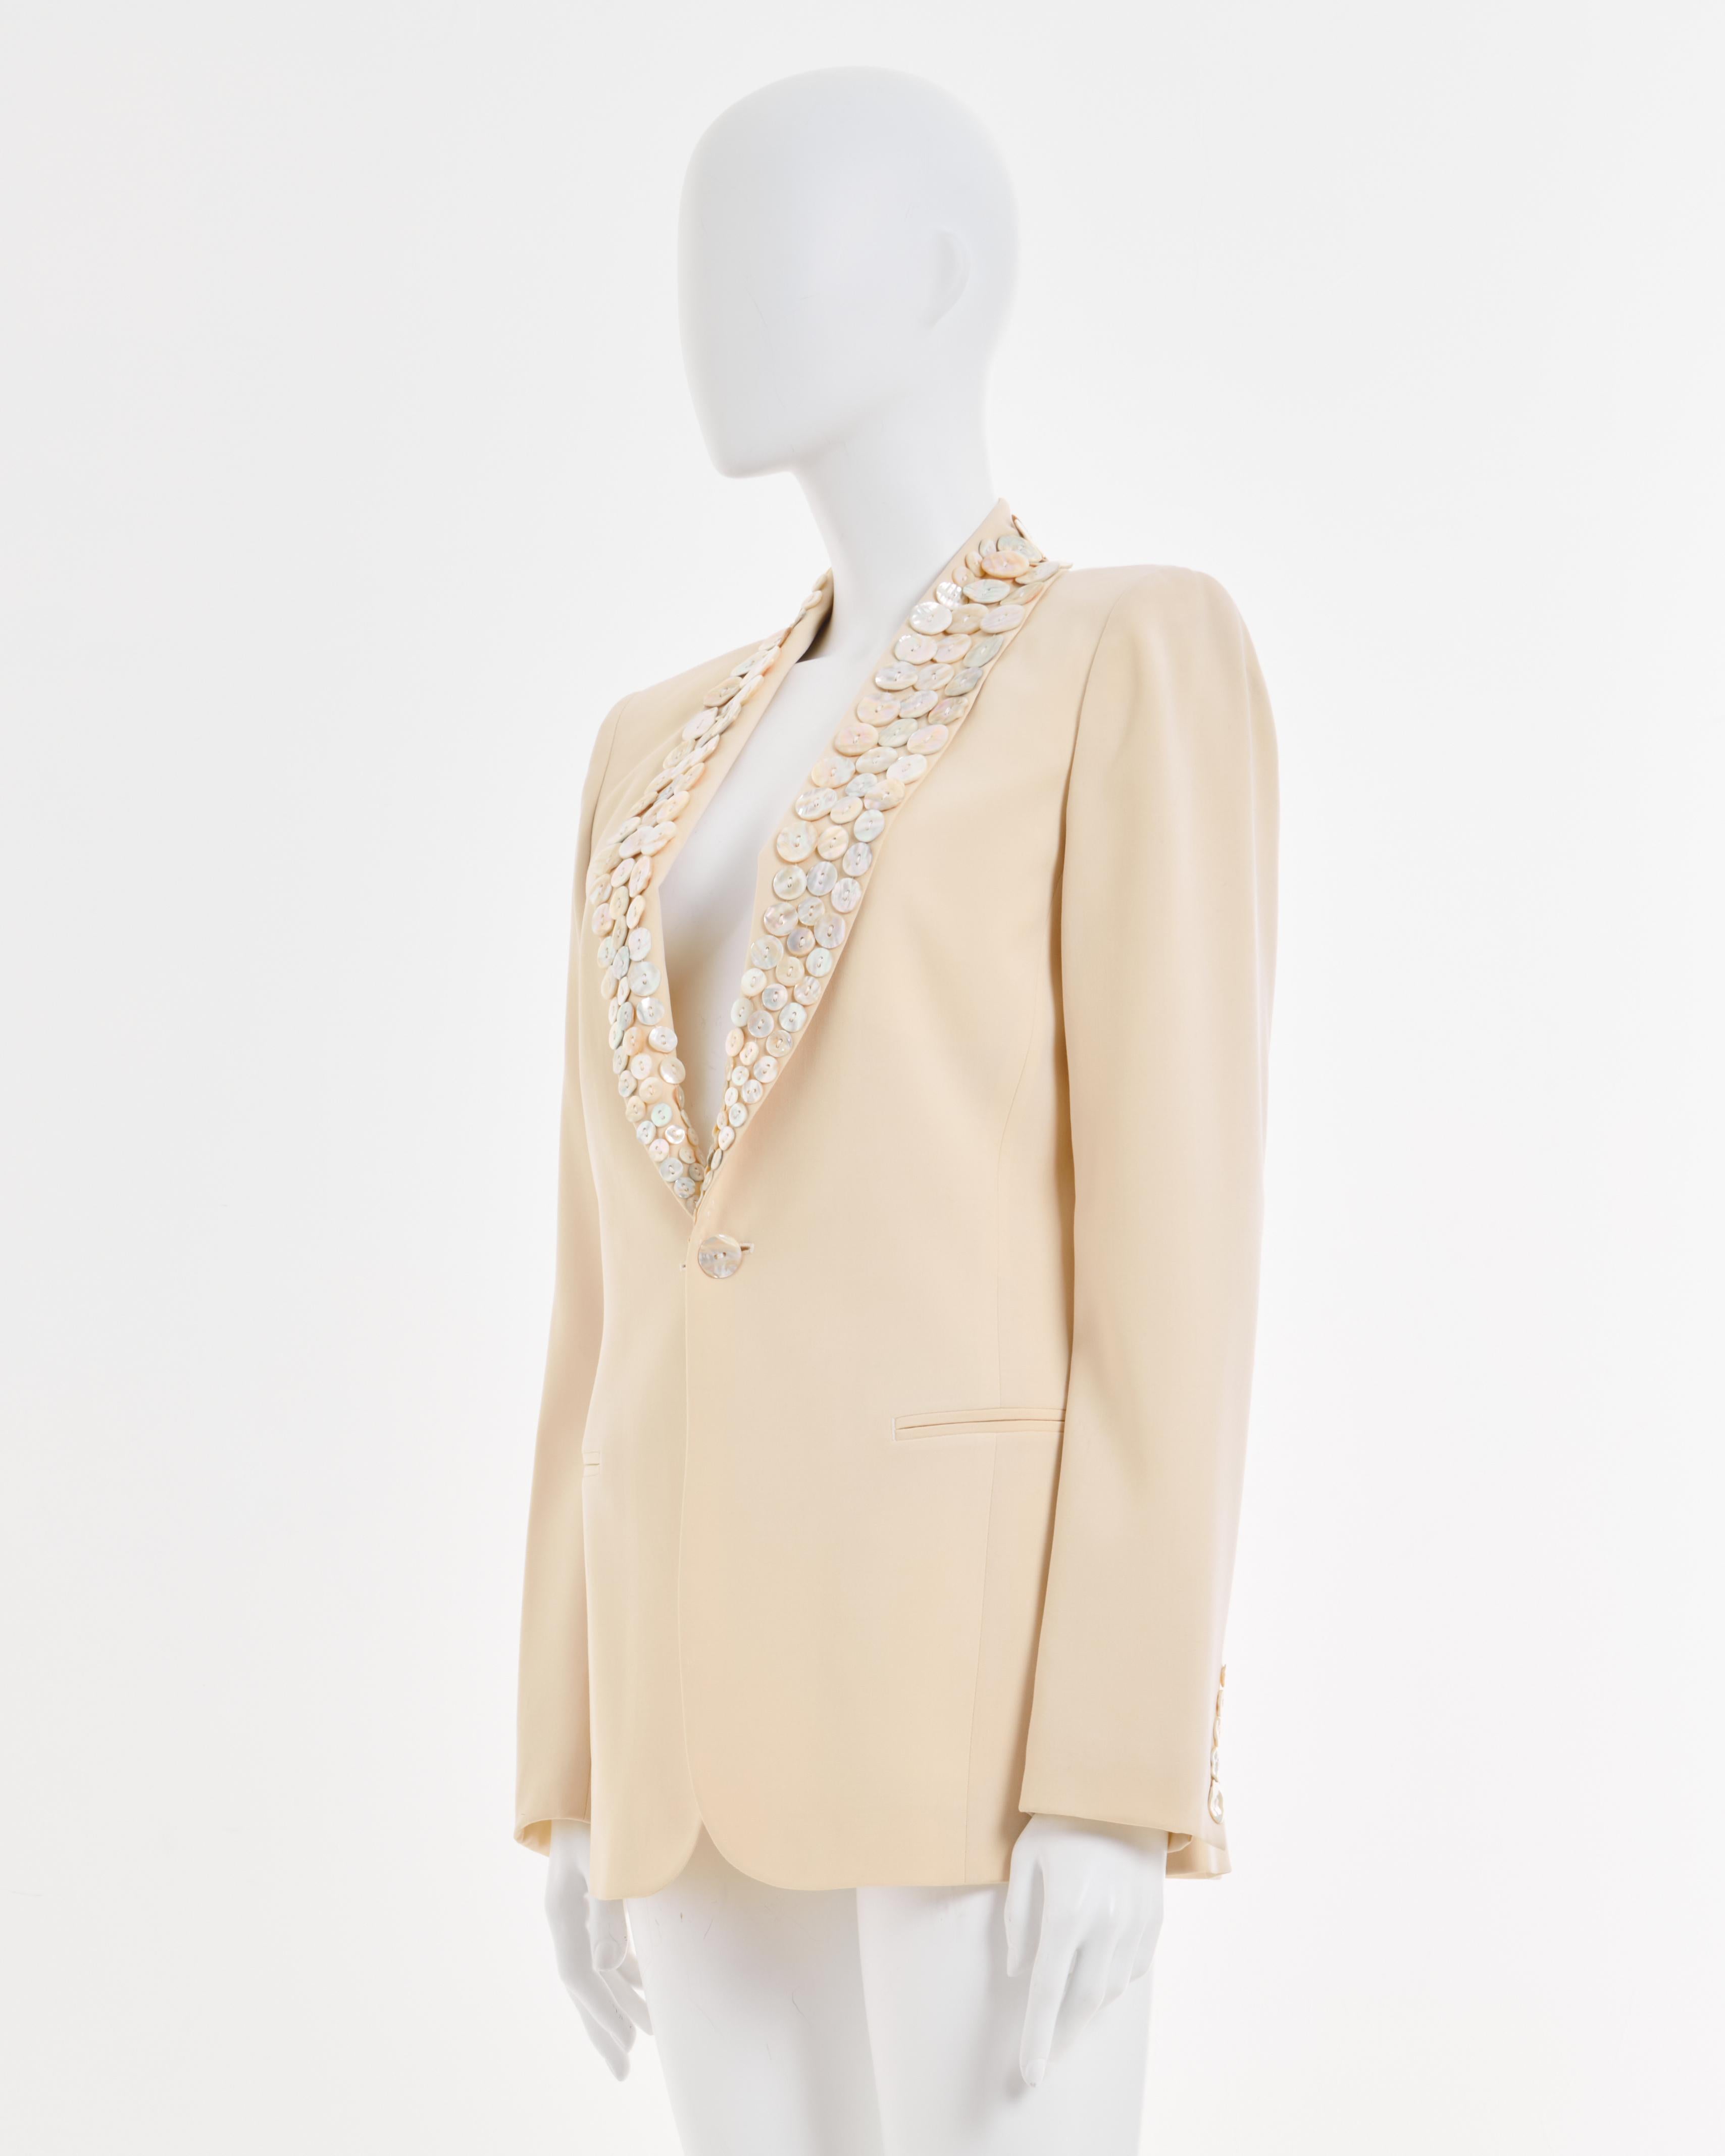 - Jean Paul Gaultier Wool Cream embellished button blazer-
- Sold by Skof.Archive 
- Spring-Summer Couture 2003
- Large iridescent mother of pearl buttons attached along lapels 
- Shawl collar with single button closure 
- Lightweight wool suiting